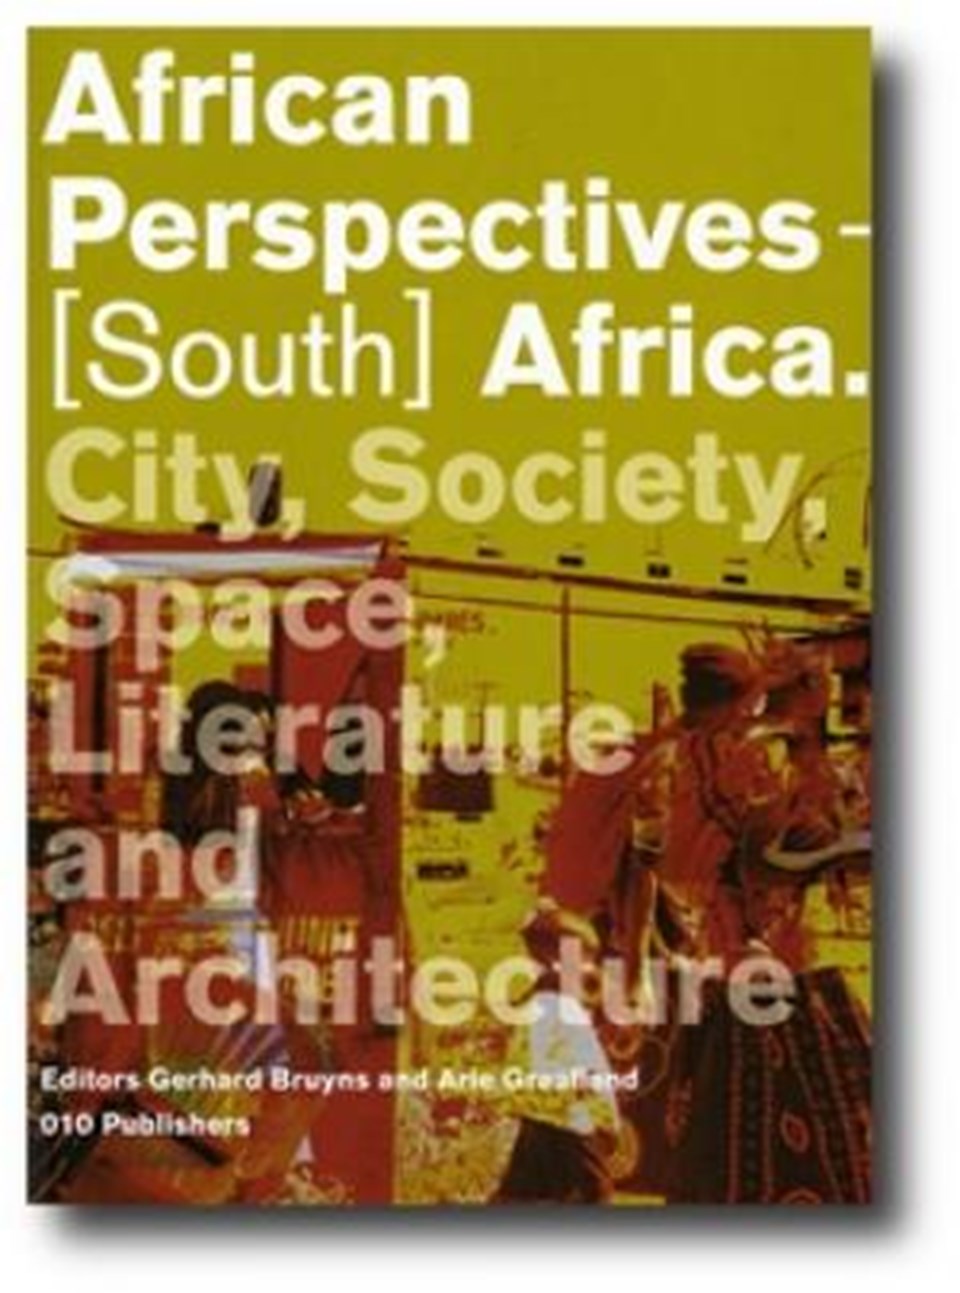 African Perspectives - (South) Africa.